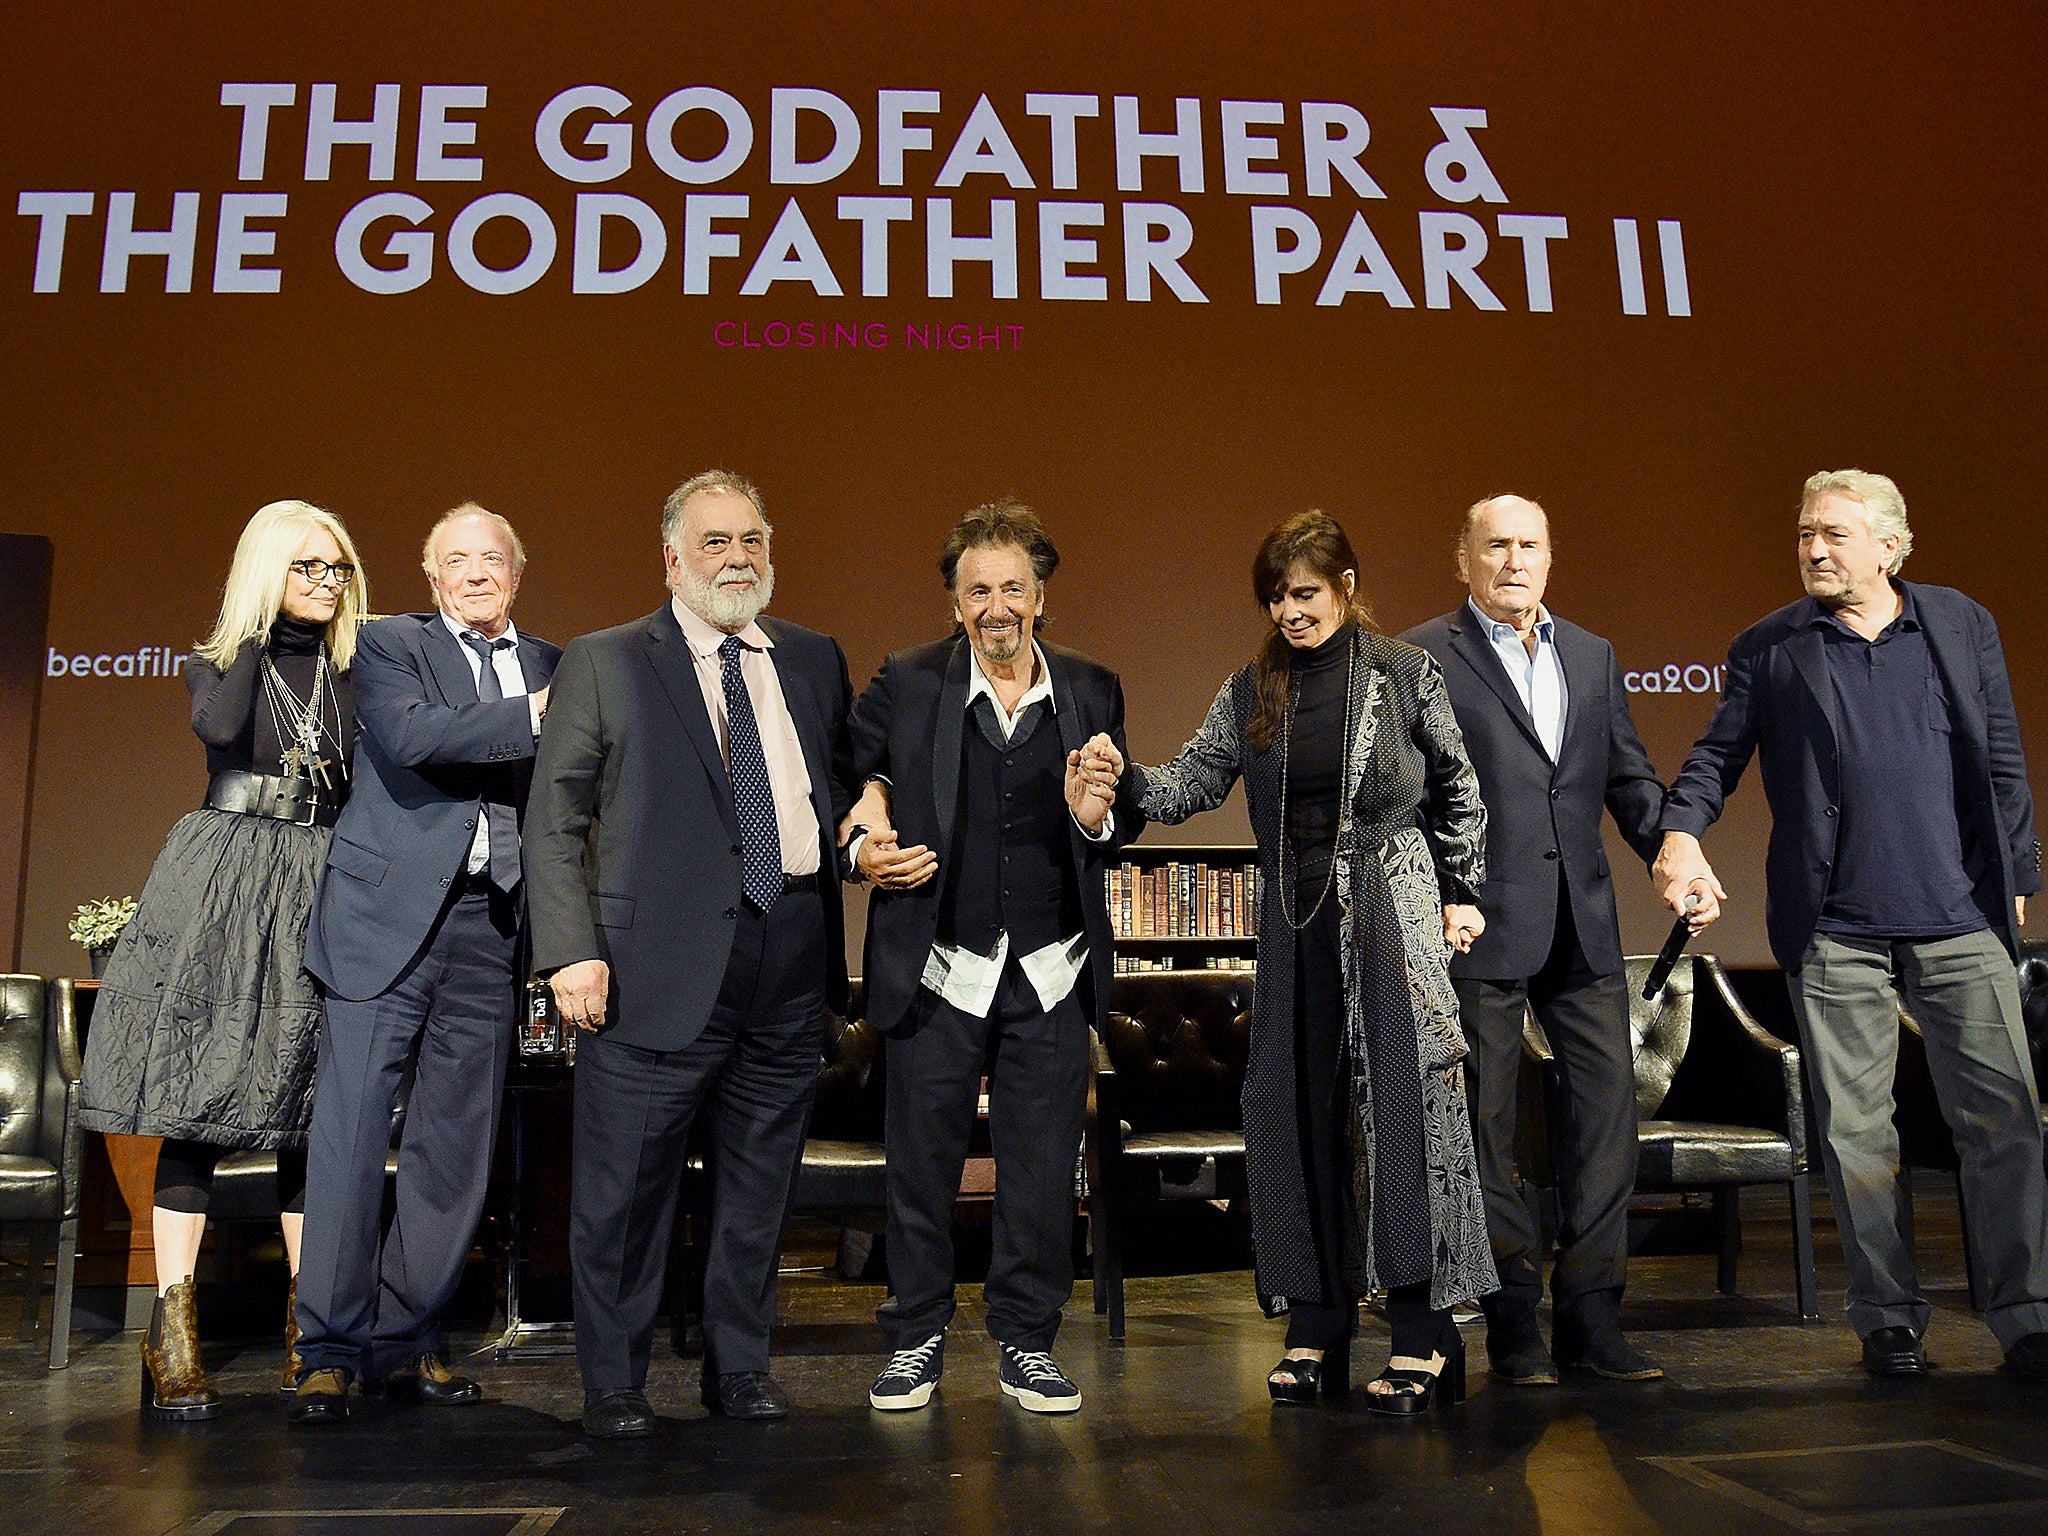 Diane Keaton, James Caan, Francis Ford Coppola, Al Pacino, Talia Shire, Robert Duvall and Robert DeNiro take a bow on stage during the panel for 'The Godfather' 45th Anniversary Screening during 2017 Tribeca Film Festival closing night at Radio City Music Hall